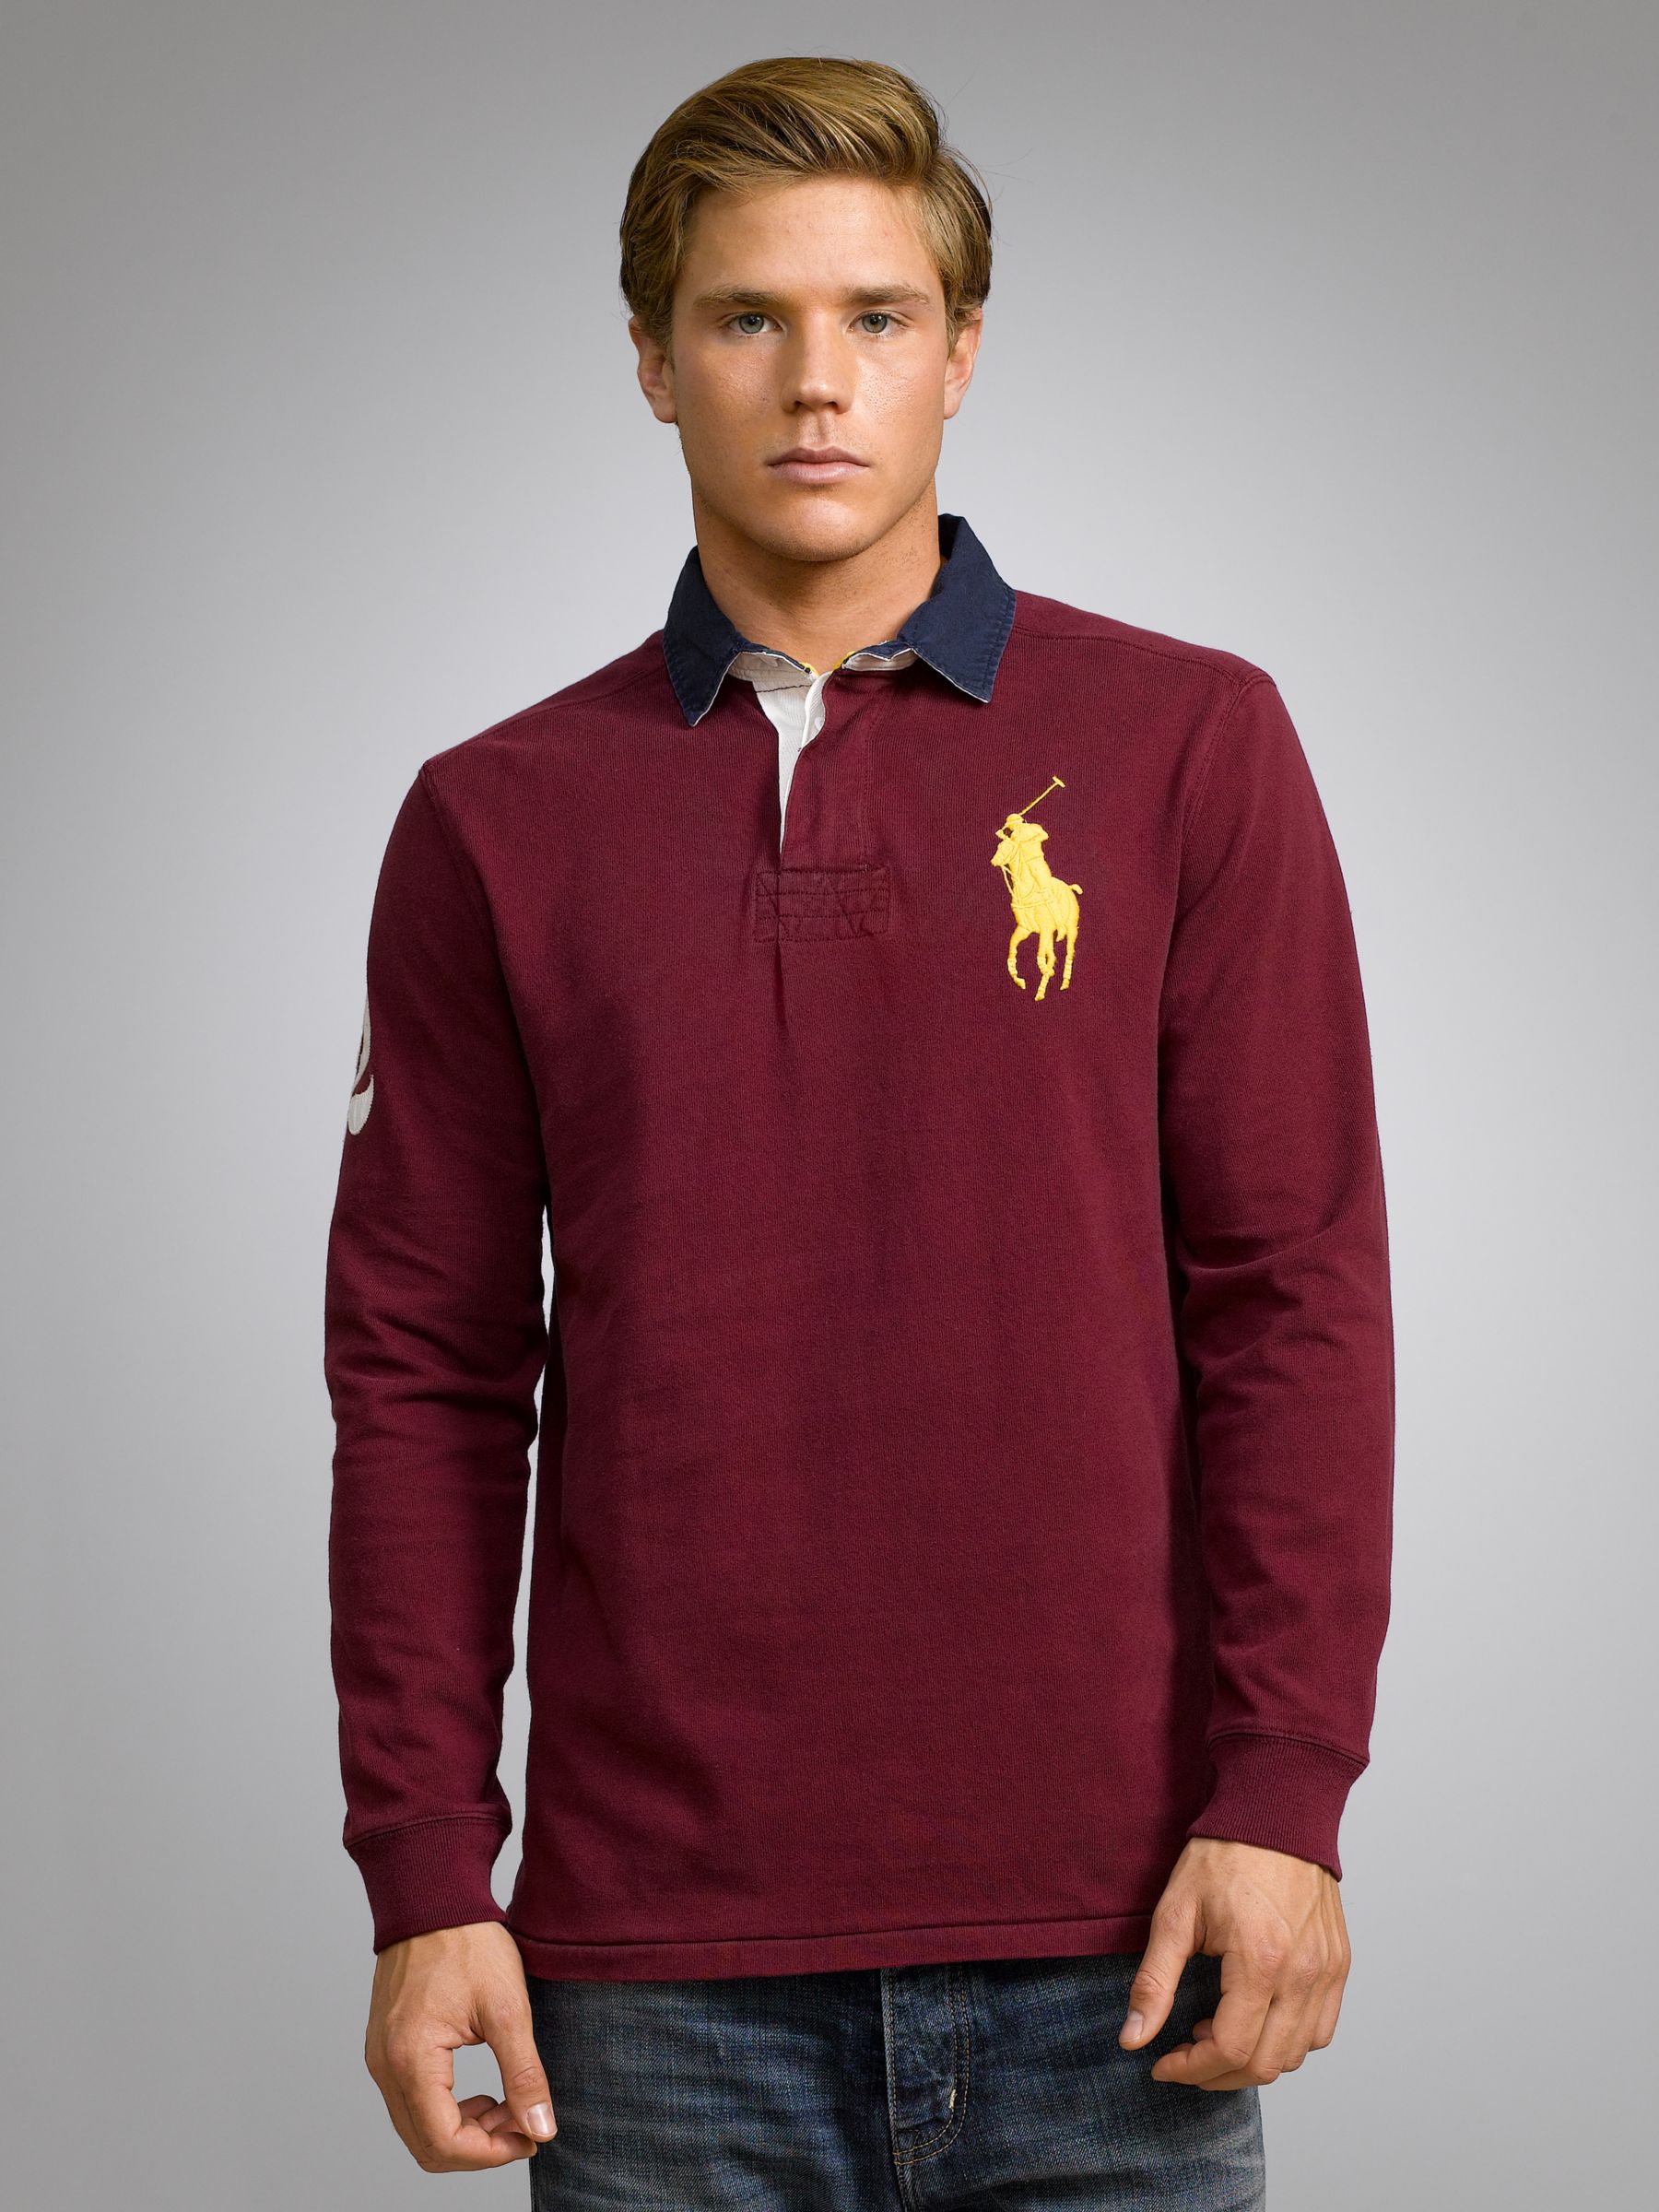 Custom Fit Rugby Shirt, Wine